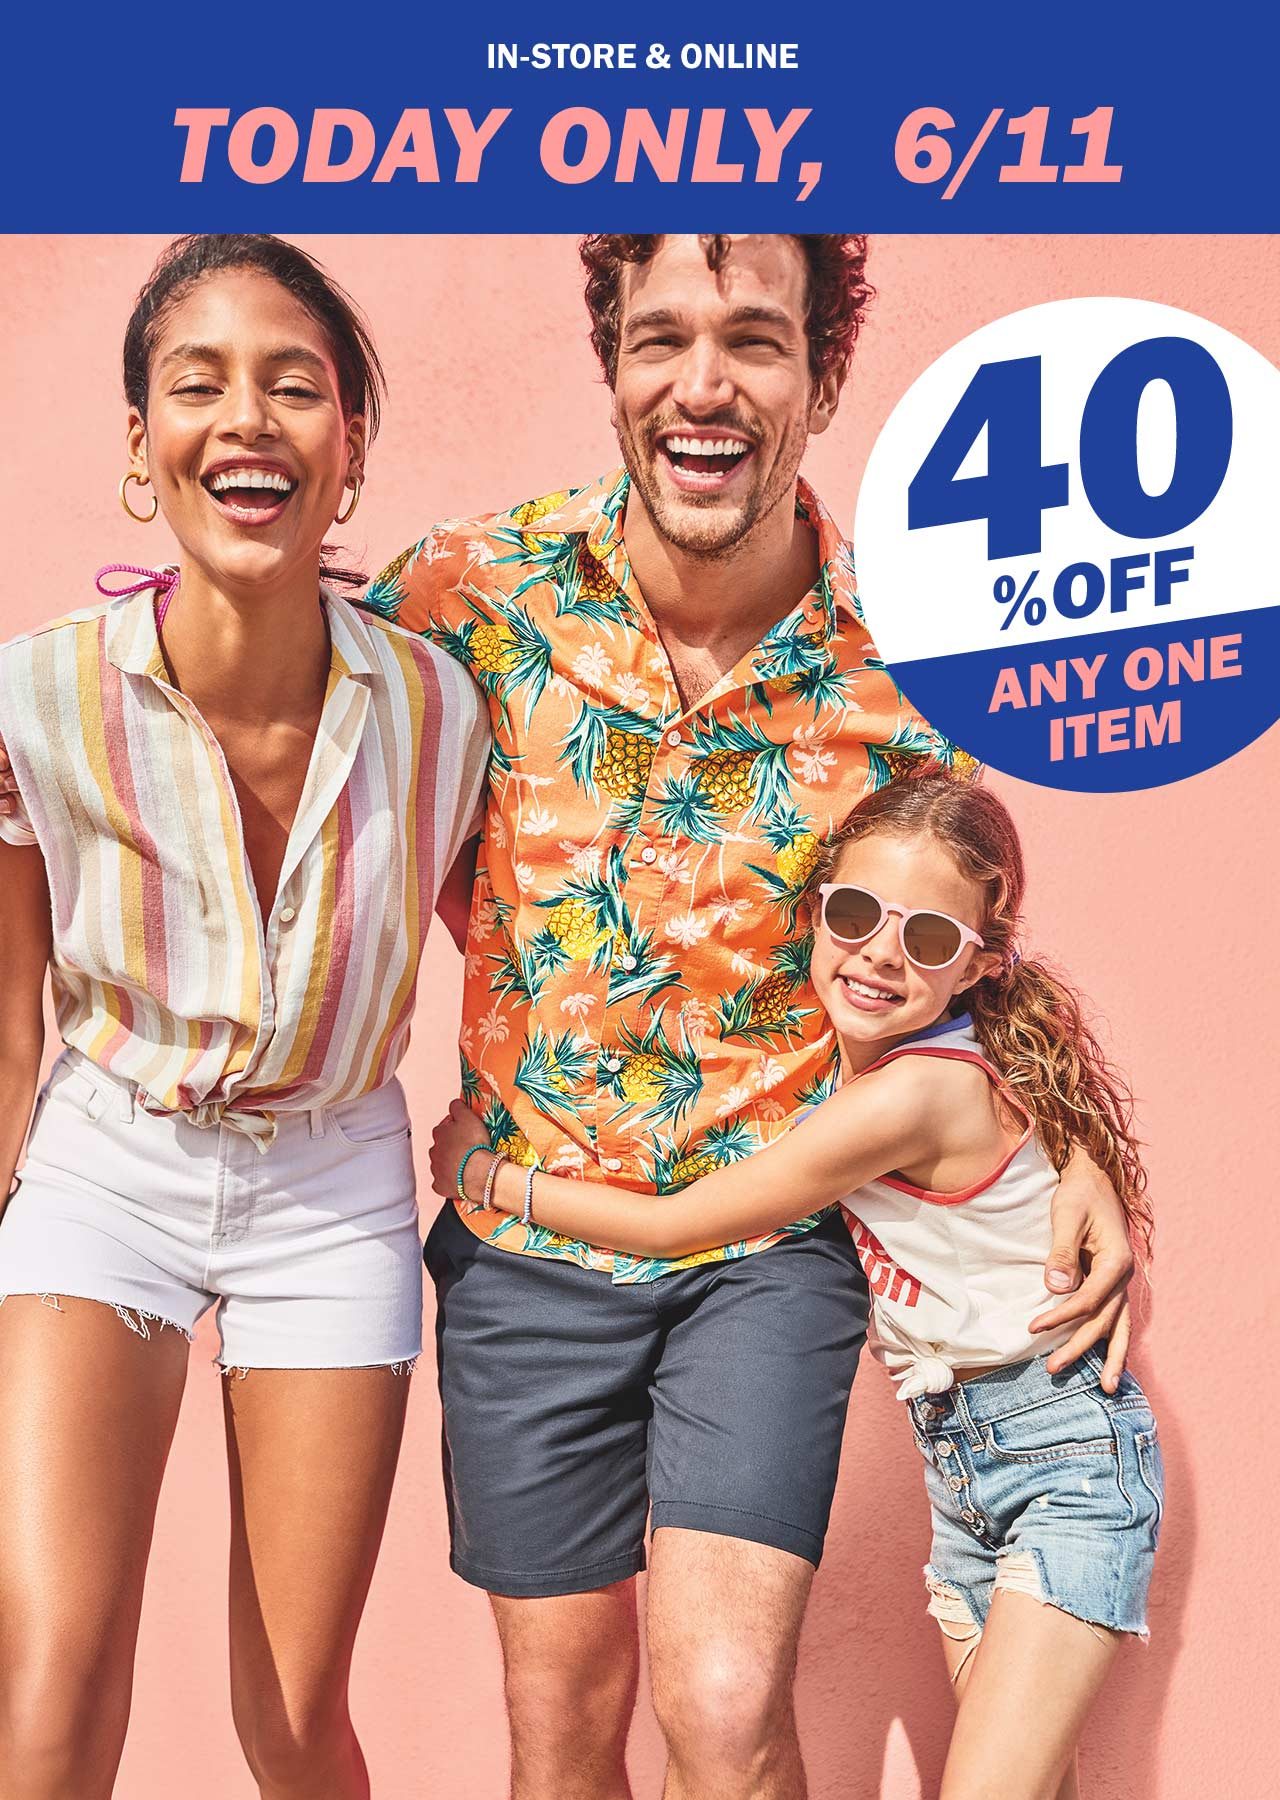 40% OFF ANY ONE ITEM